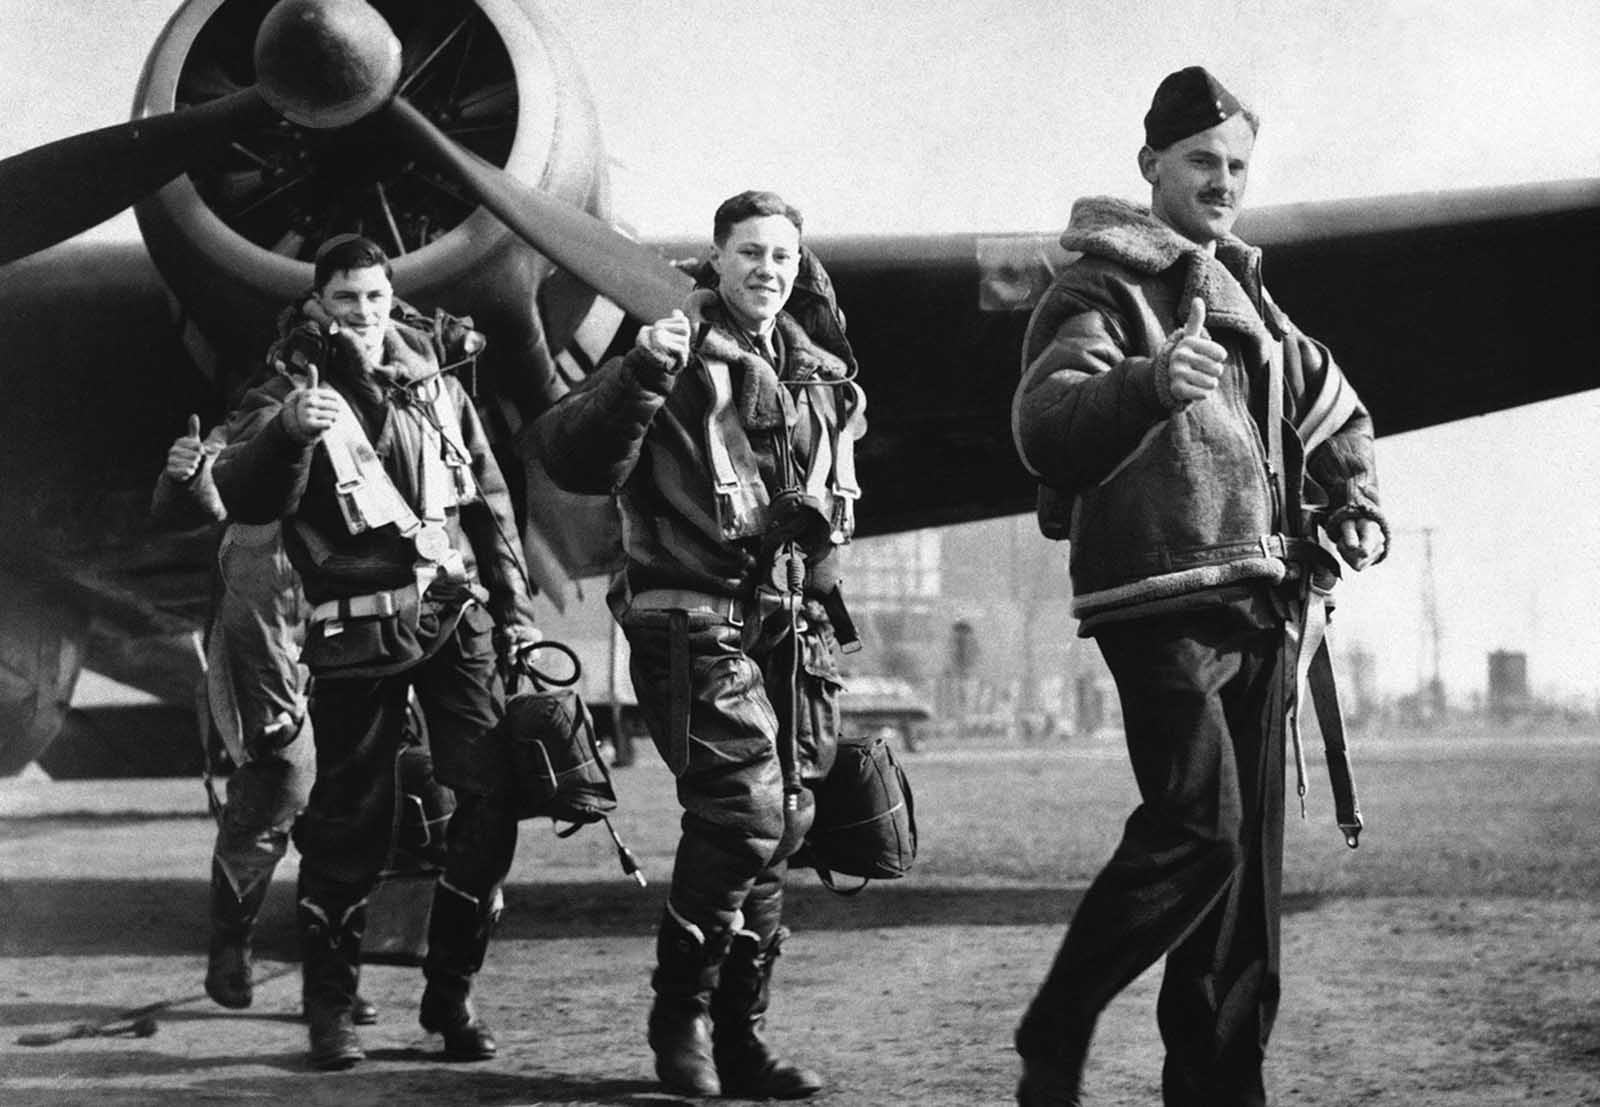 Members of a British Royal Air Force bombing squadron hold thumbs up on April 22, 1940, as they return to home base from an attack on German warships off Bergen, Norway.